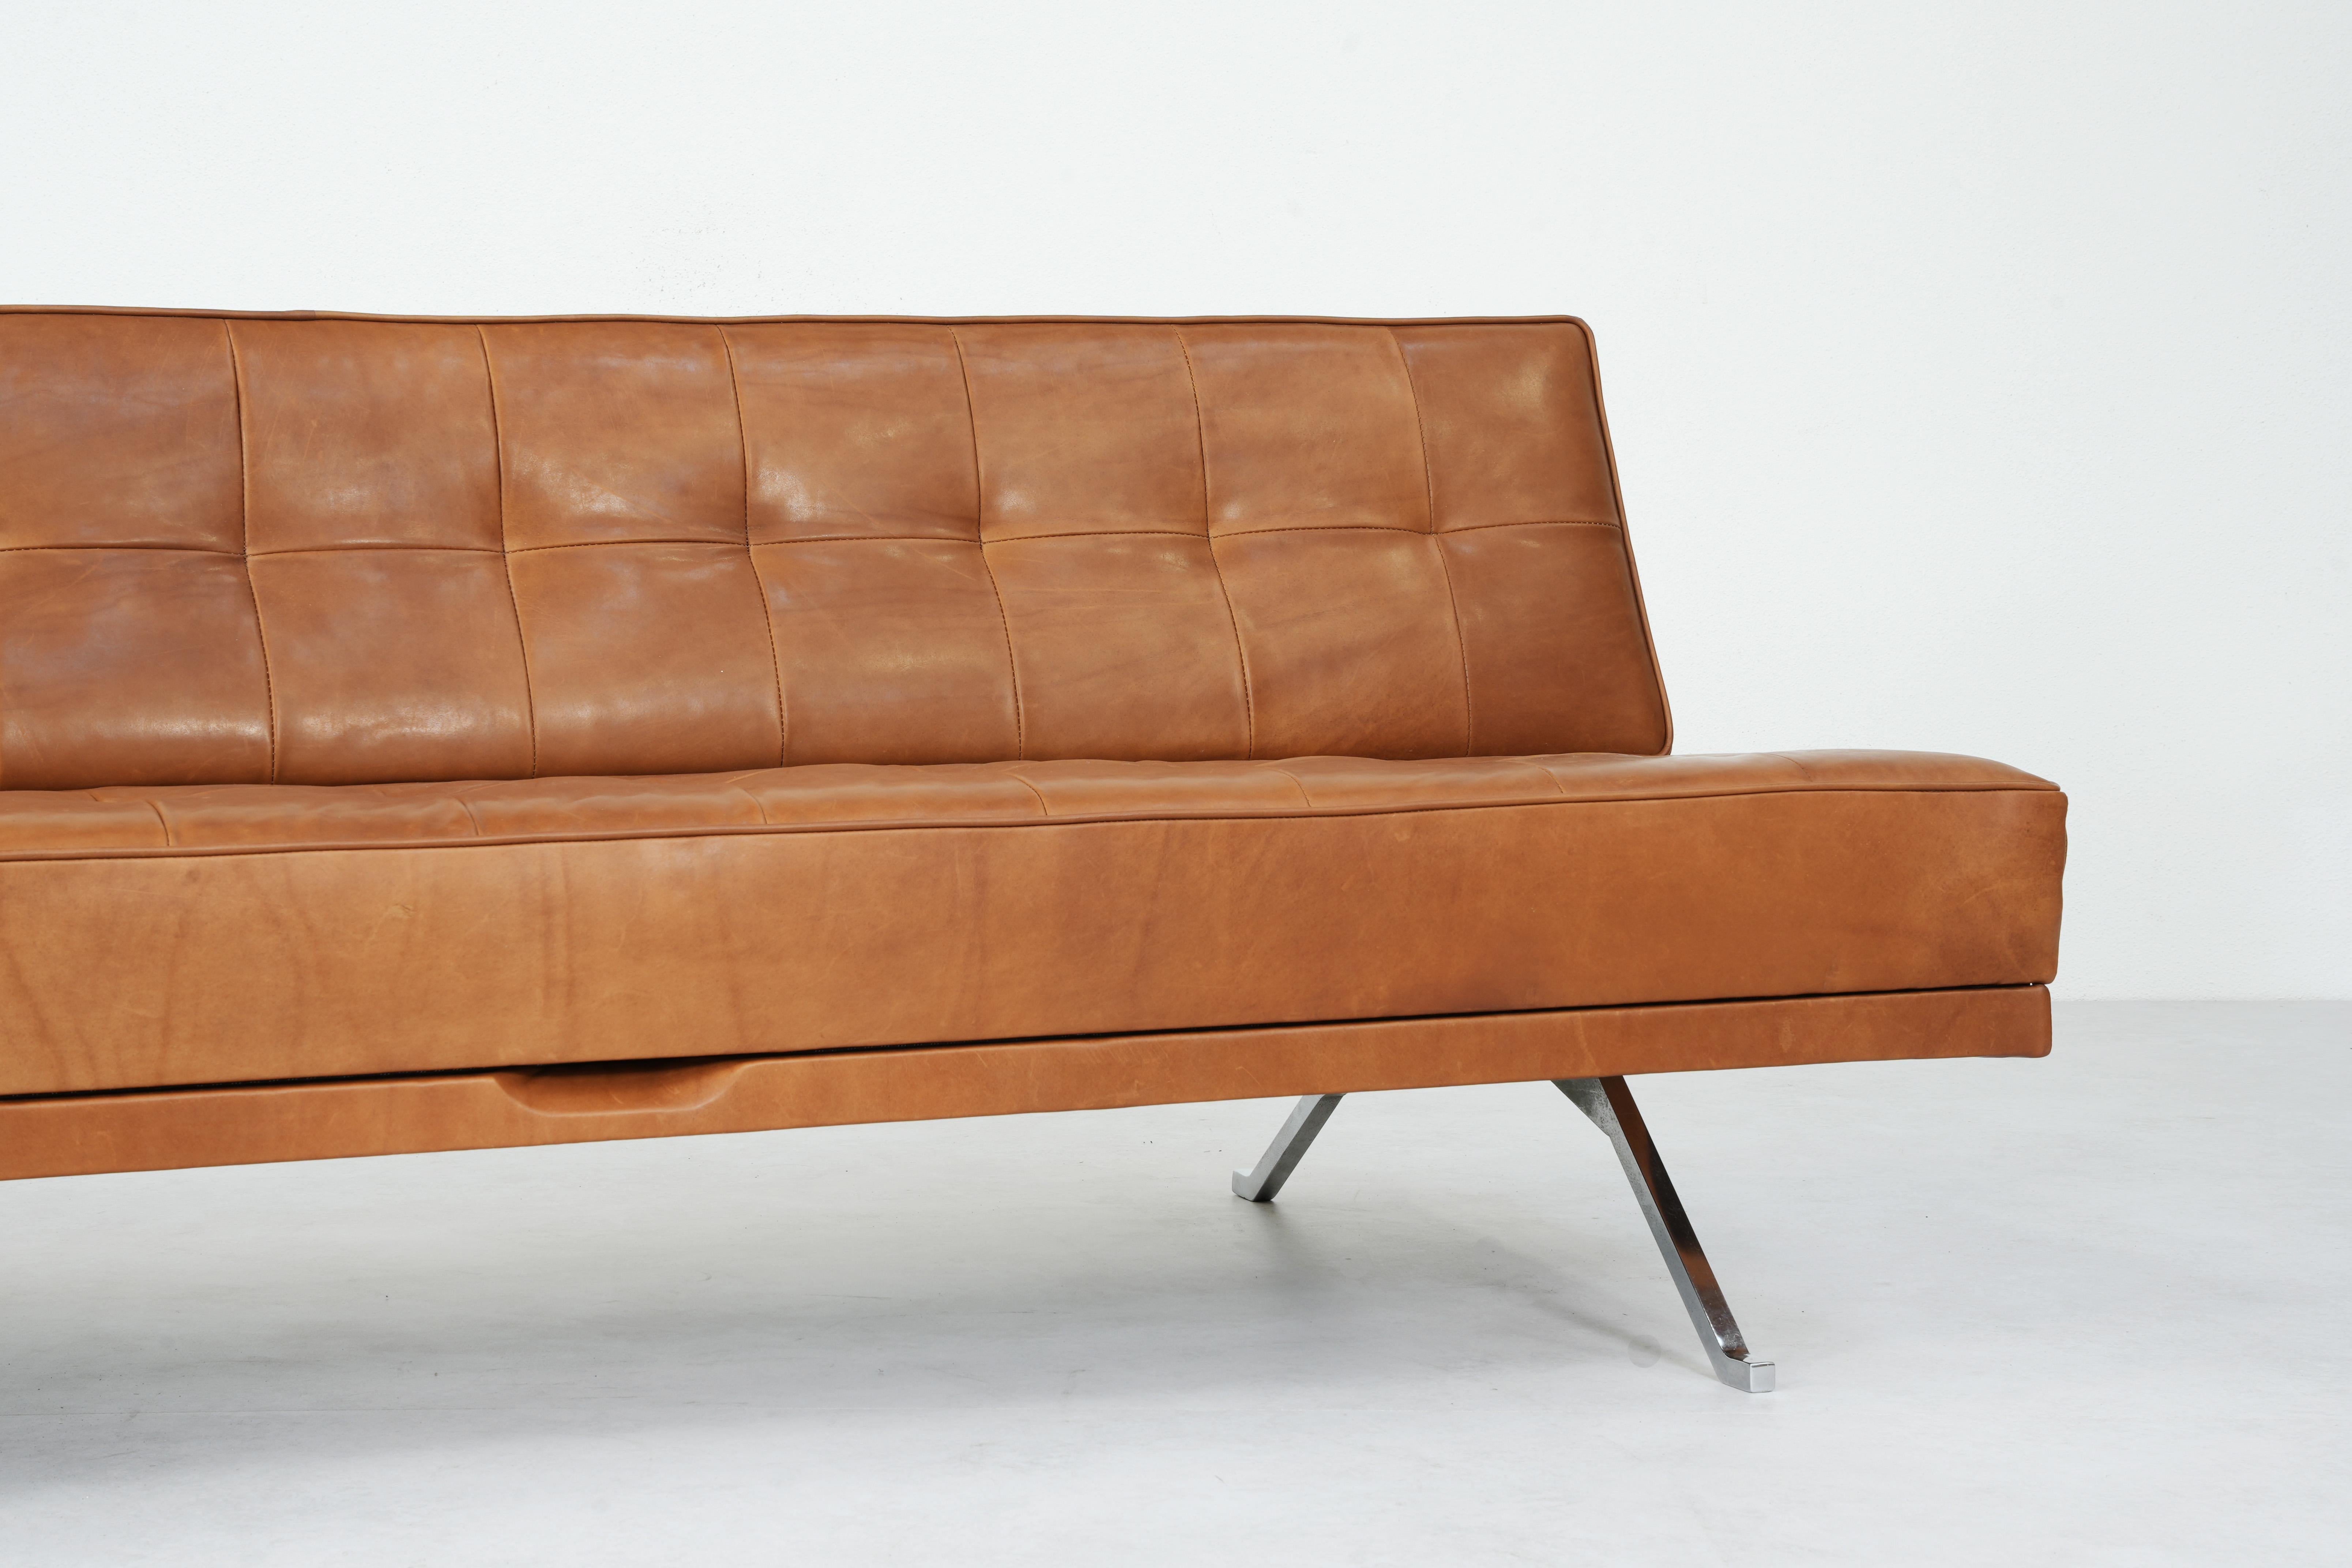 Steel Sofa Daybed Constanze by Johannes Spalt for Wittmann, Austria 1960ies For Sale